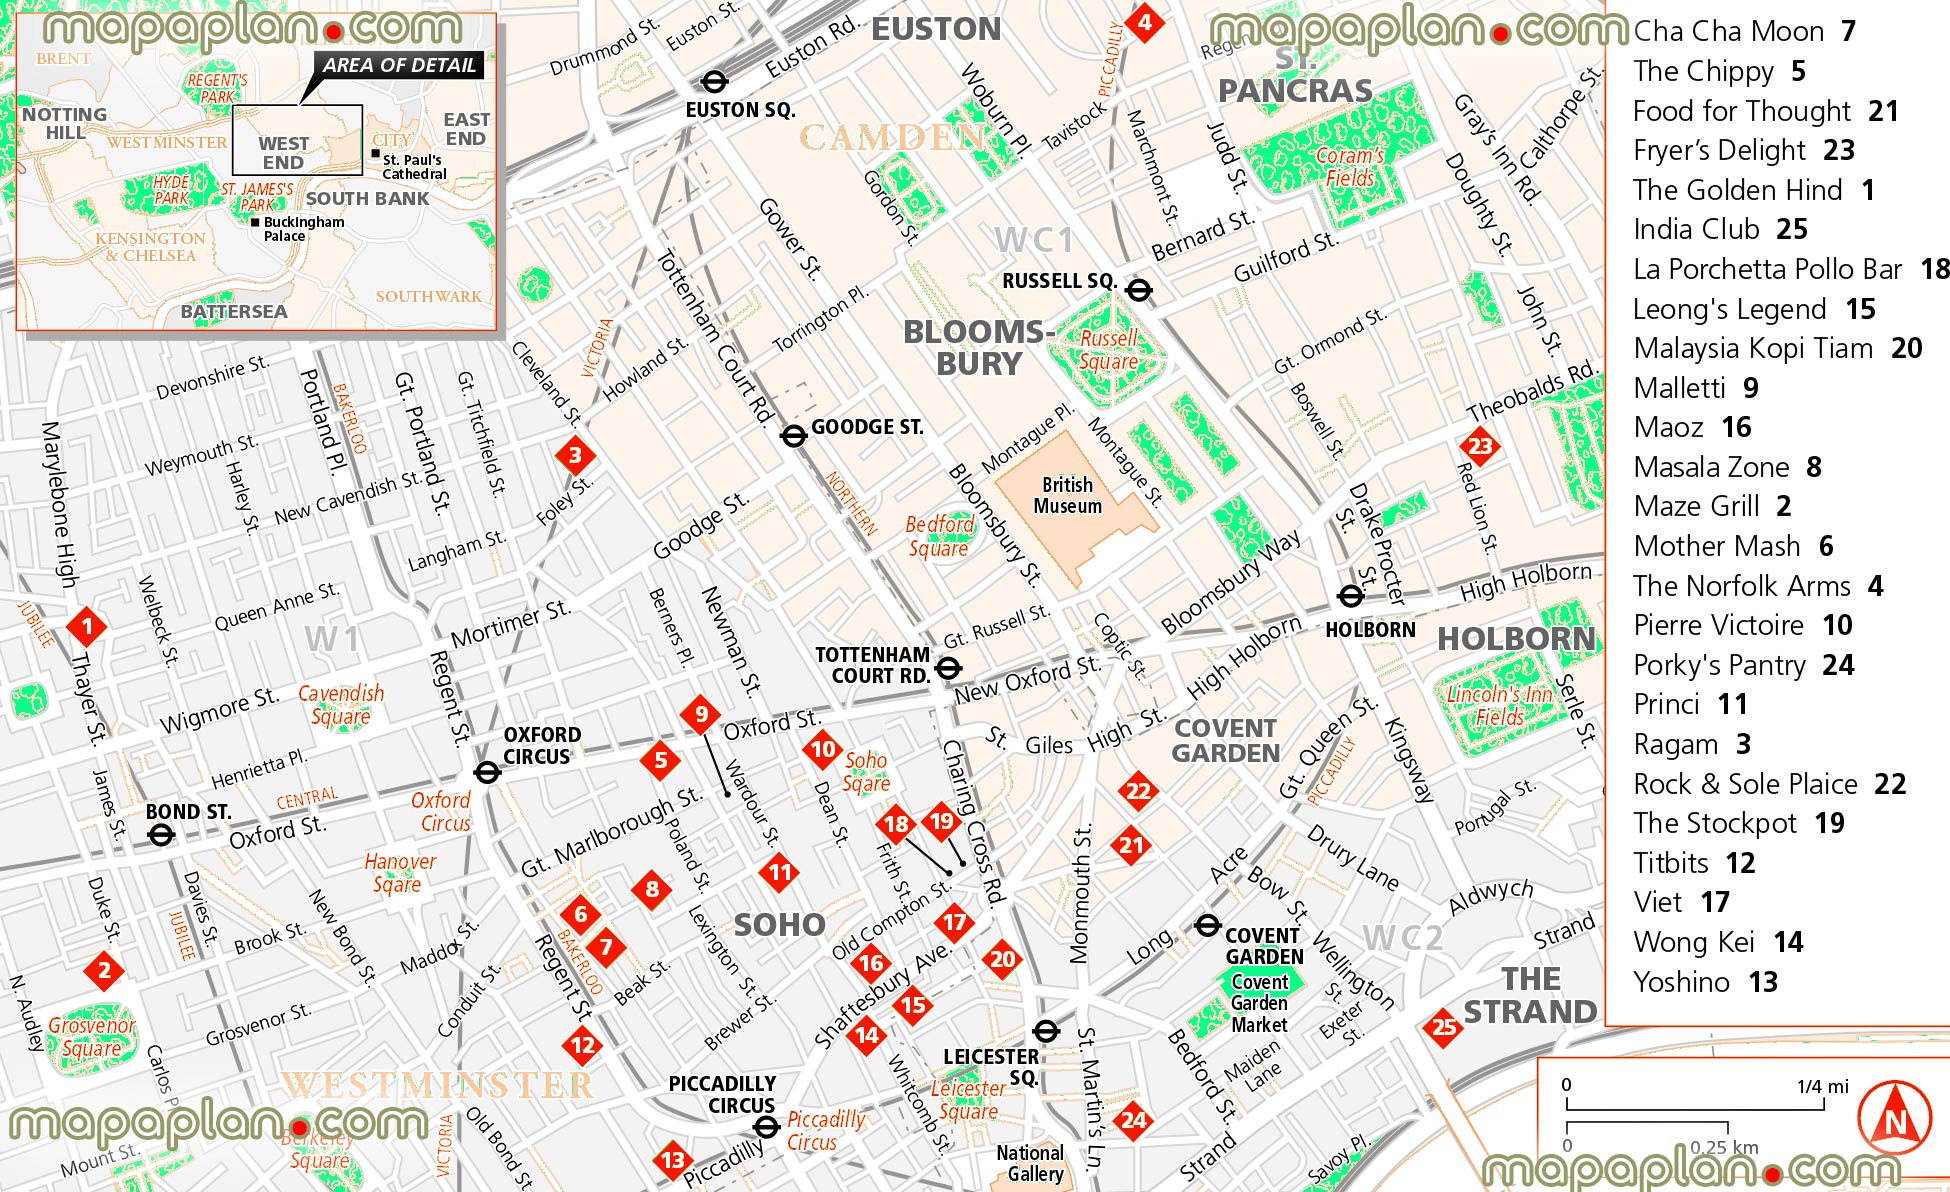 west end restaurants dining optionss London Top tourist attractions map